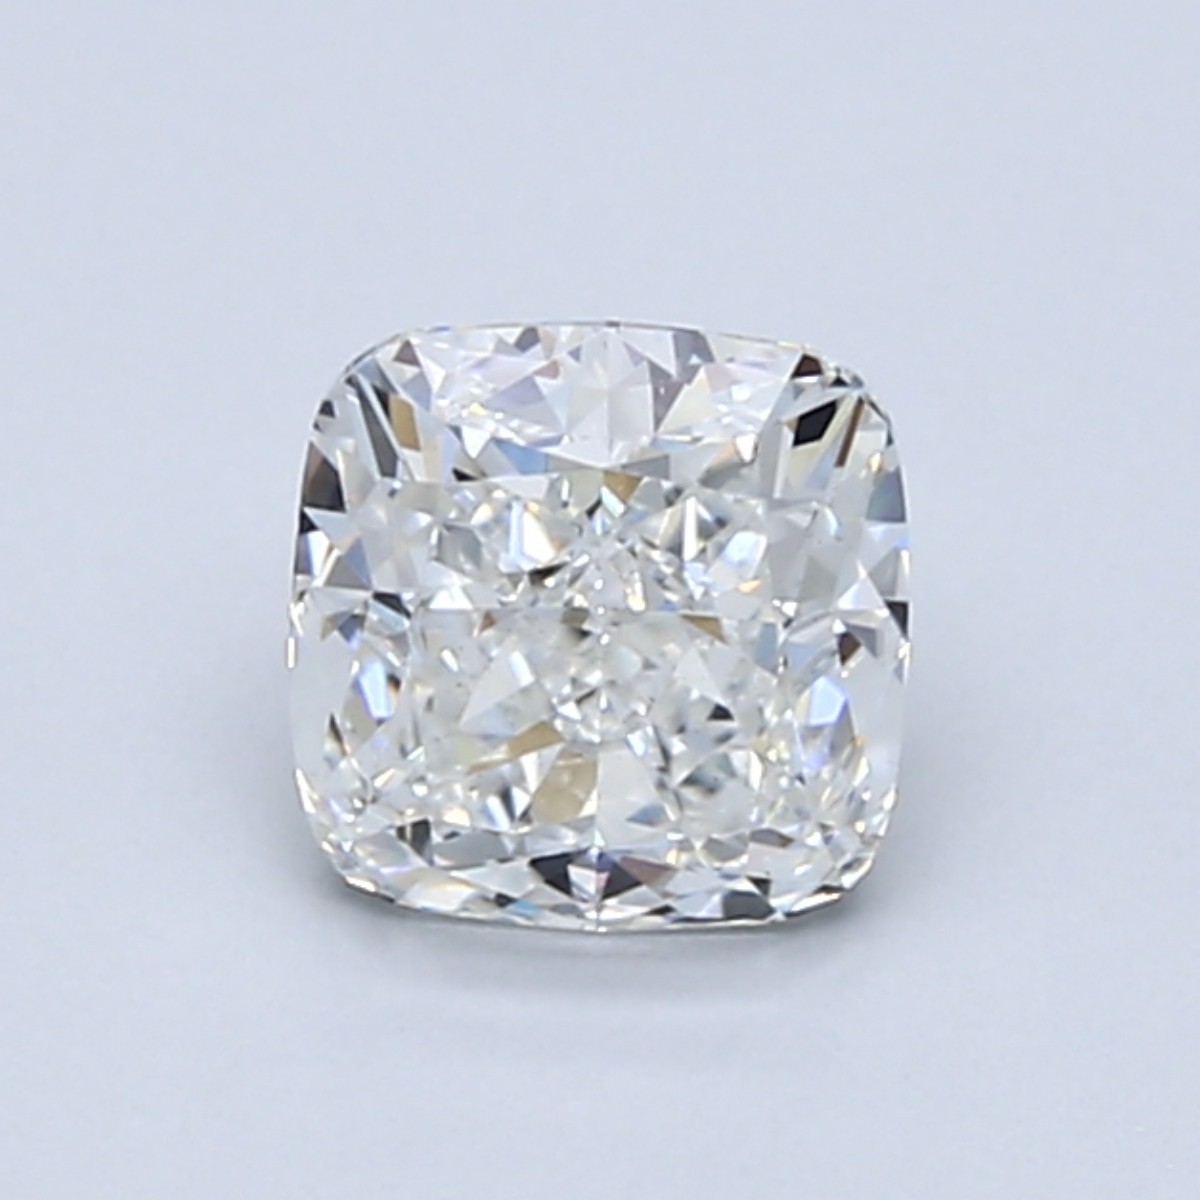 Cushion 1.07 Carat G Color VS2 Clarity For Sale